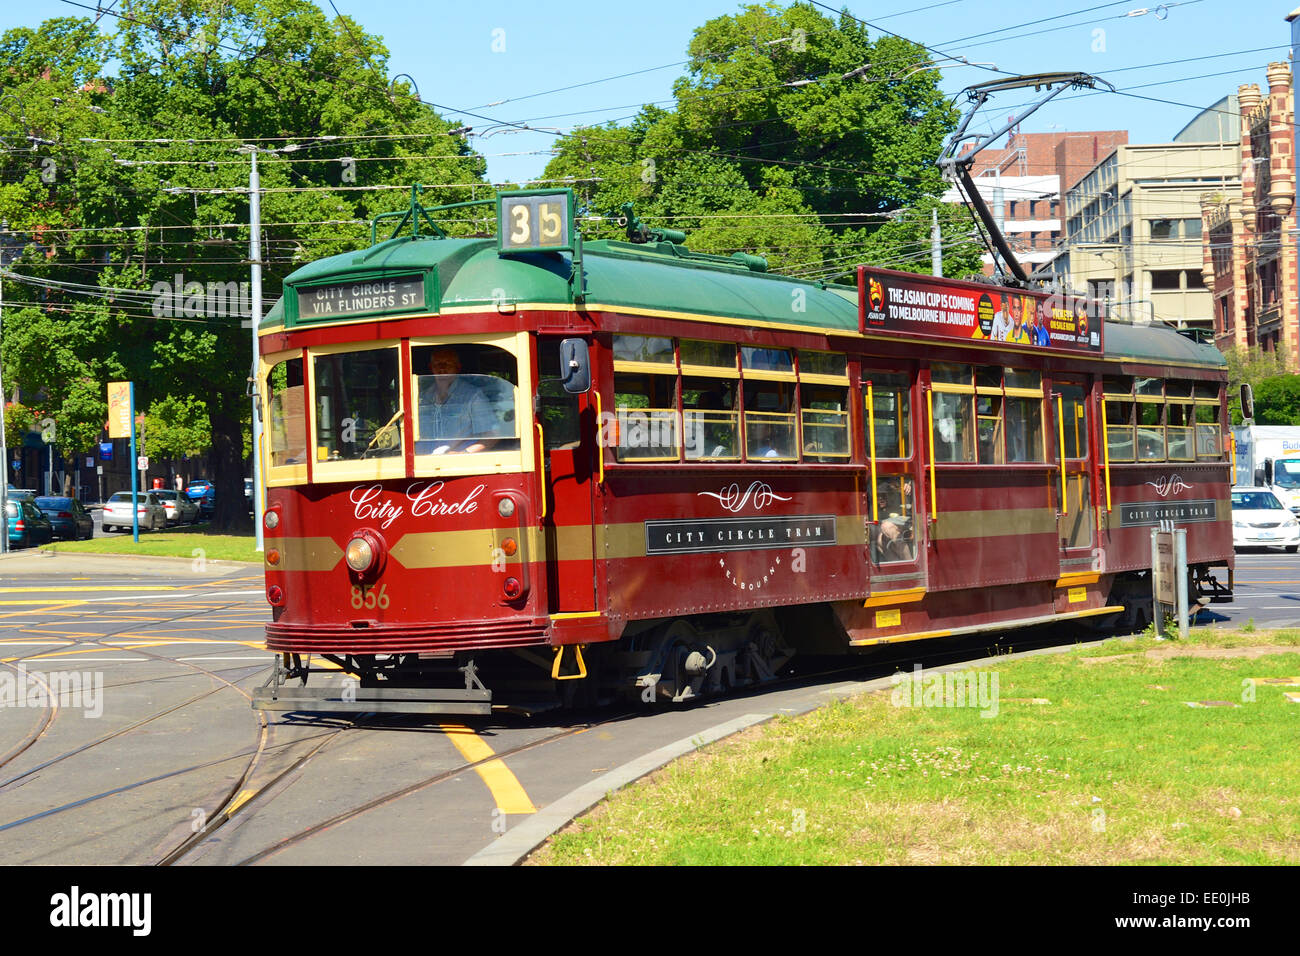 Antique tram on the City Circle line in Melbourne Australia.  The tram is free to all passengers and promotes tourism within the Stock Photo